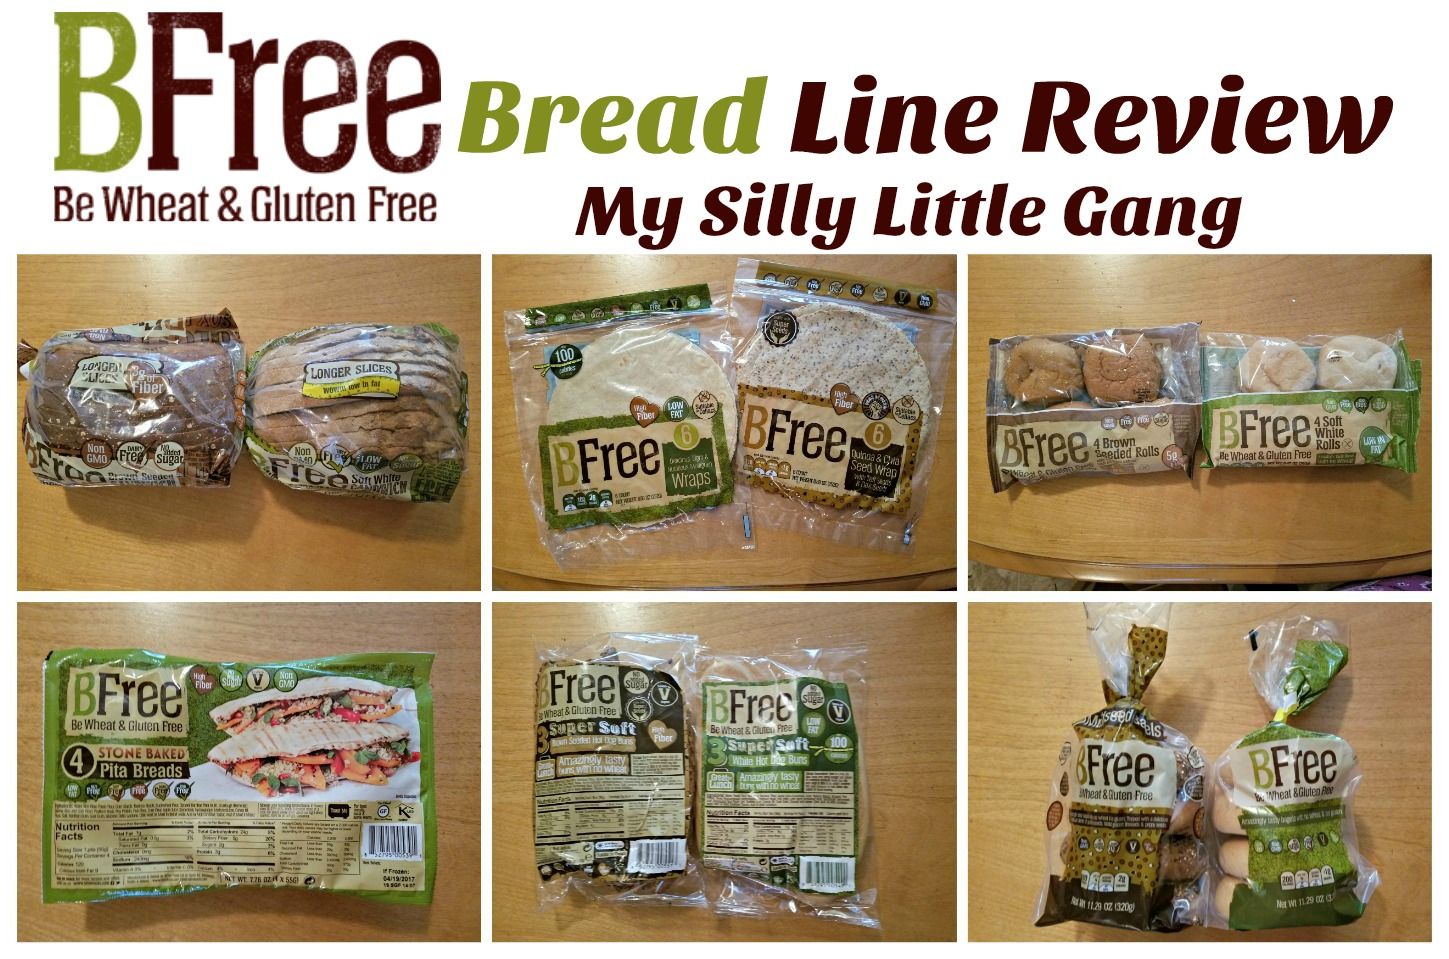 BFree bread line review